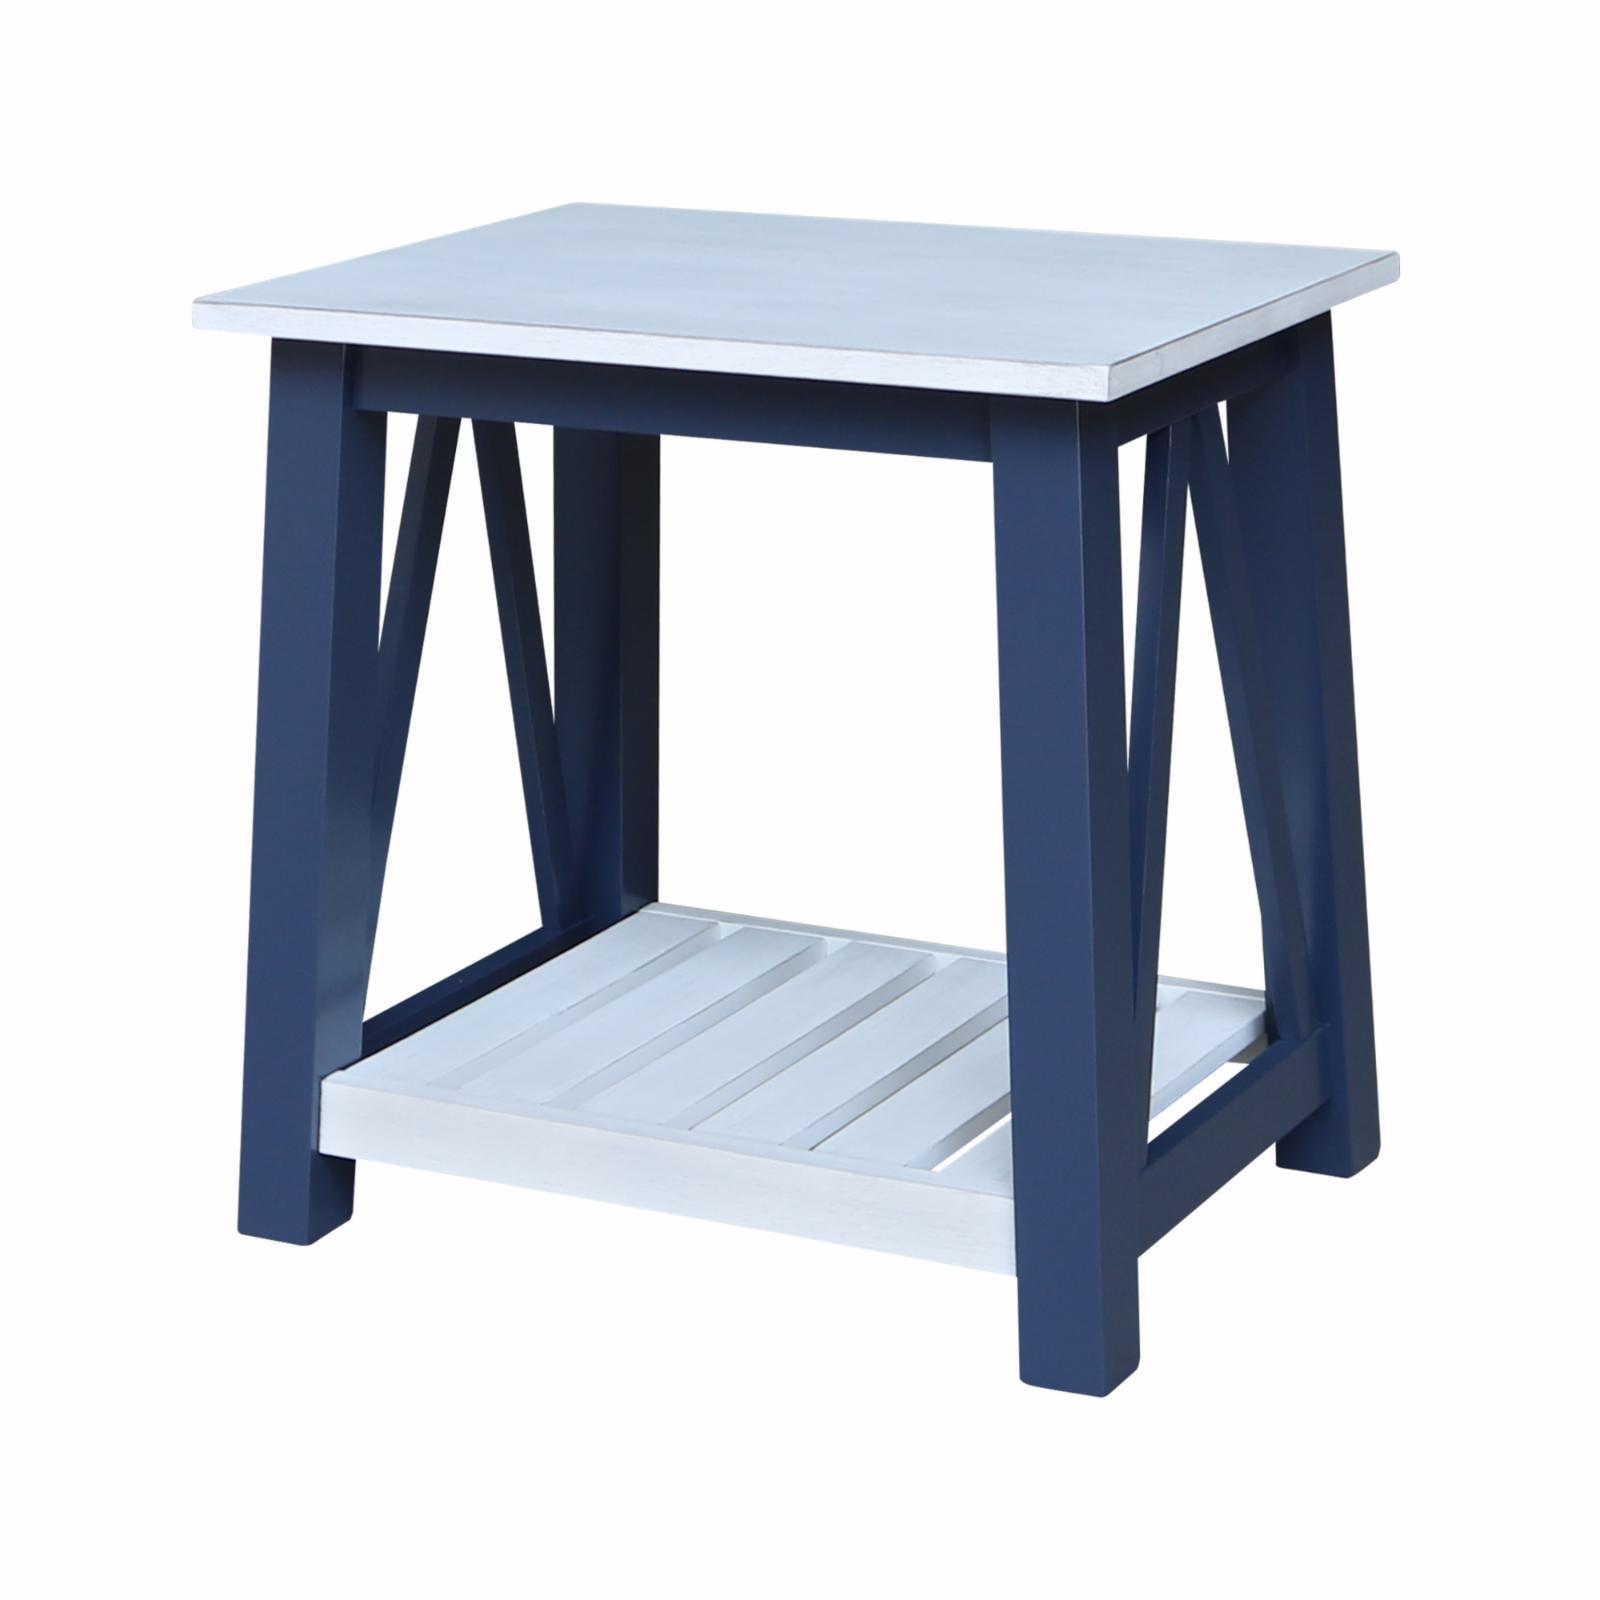 Surrey Solid Wood Rectangular End Table with Shelf - Antiqued Blue